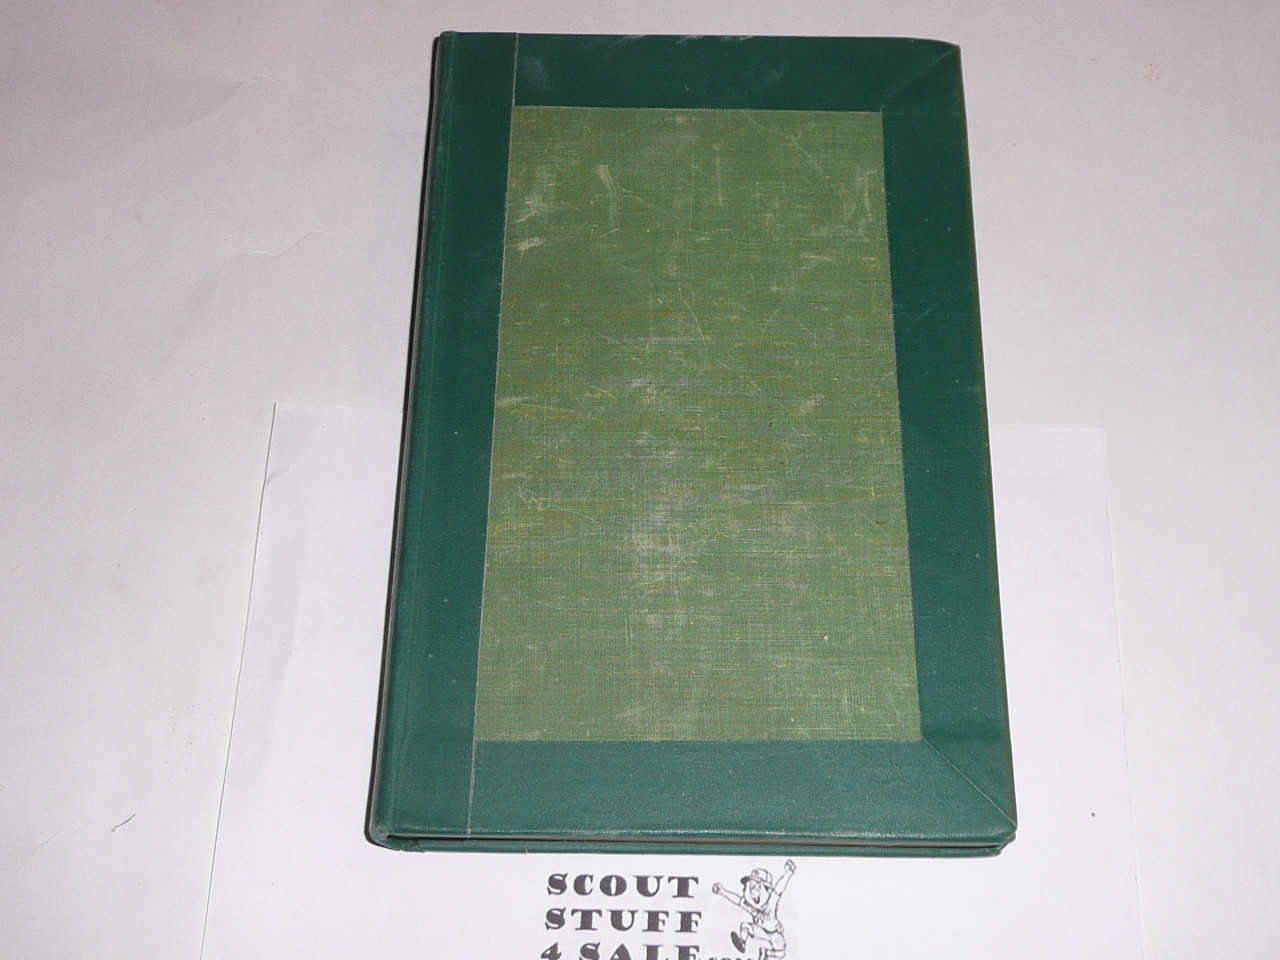 The Scout Movement, By E.E. Reynolds, 1950 printing